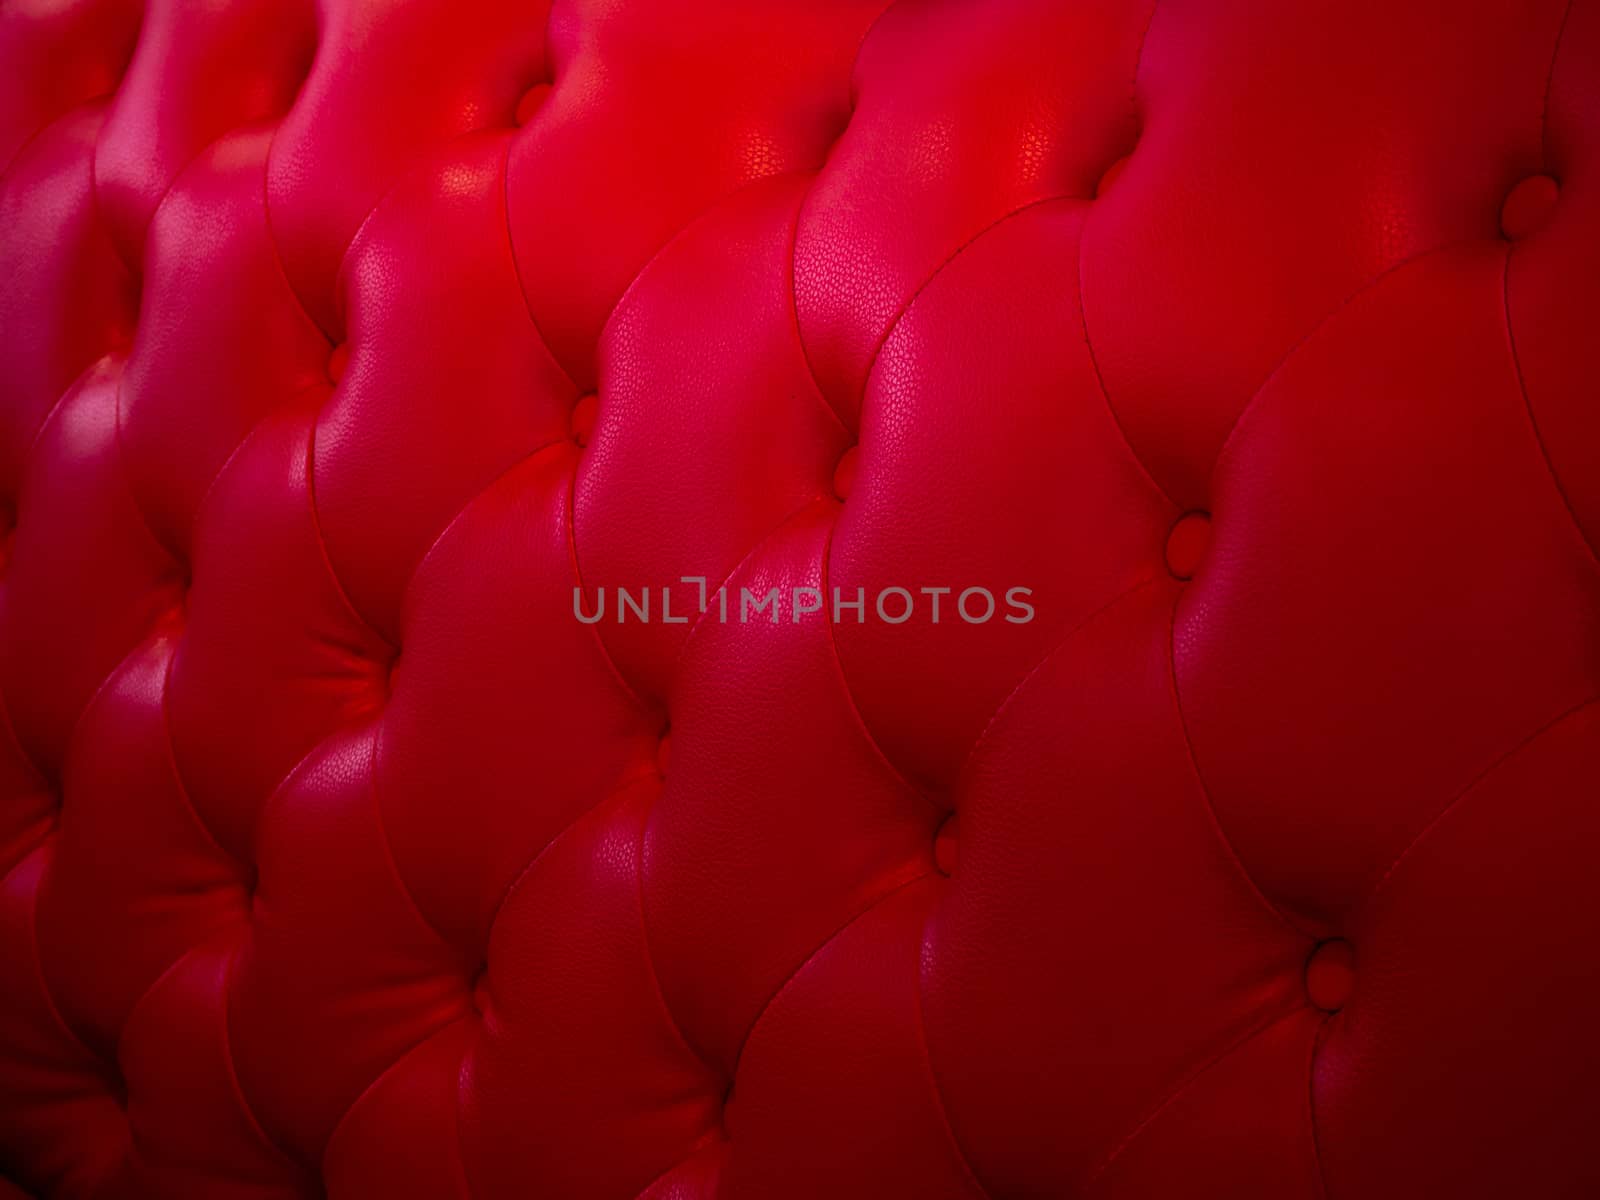 Background from leather of cushion. Red leather from retro chairs. The seat has a vintage style texture